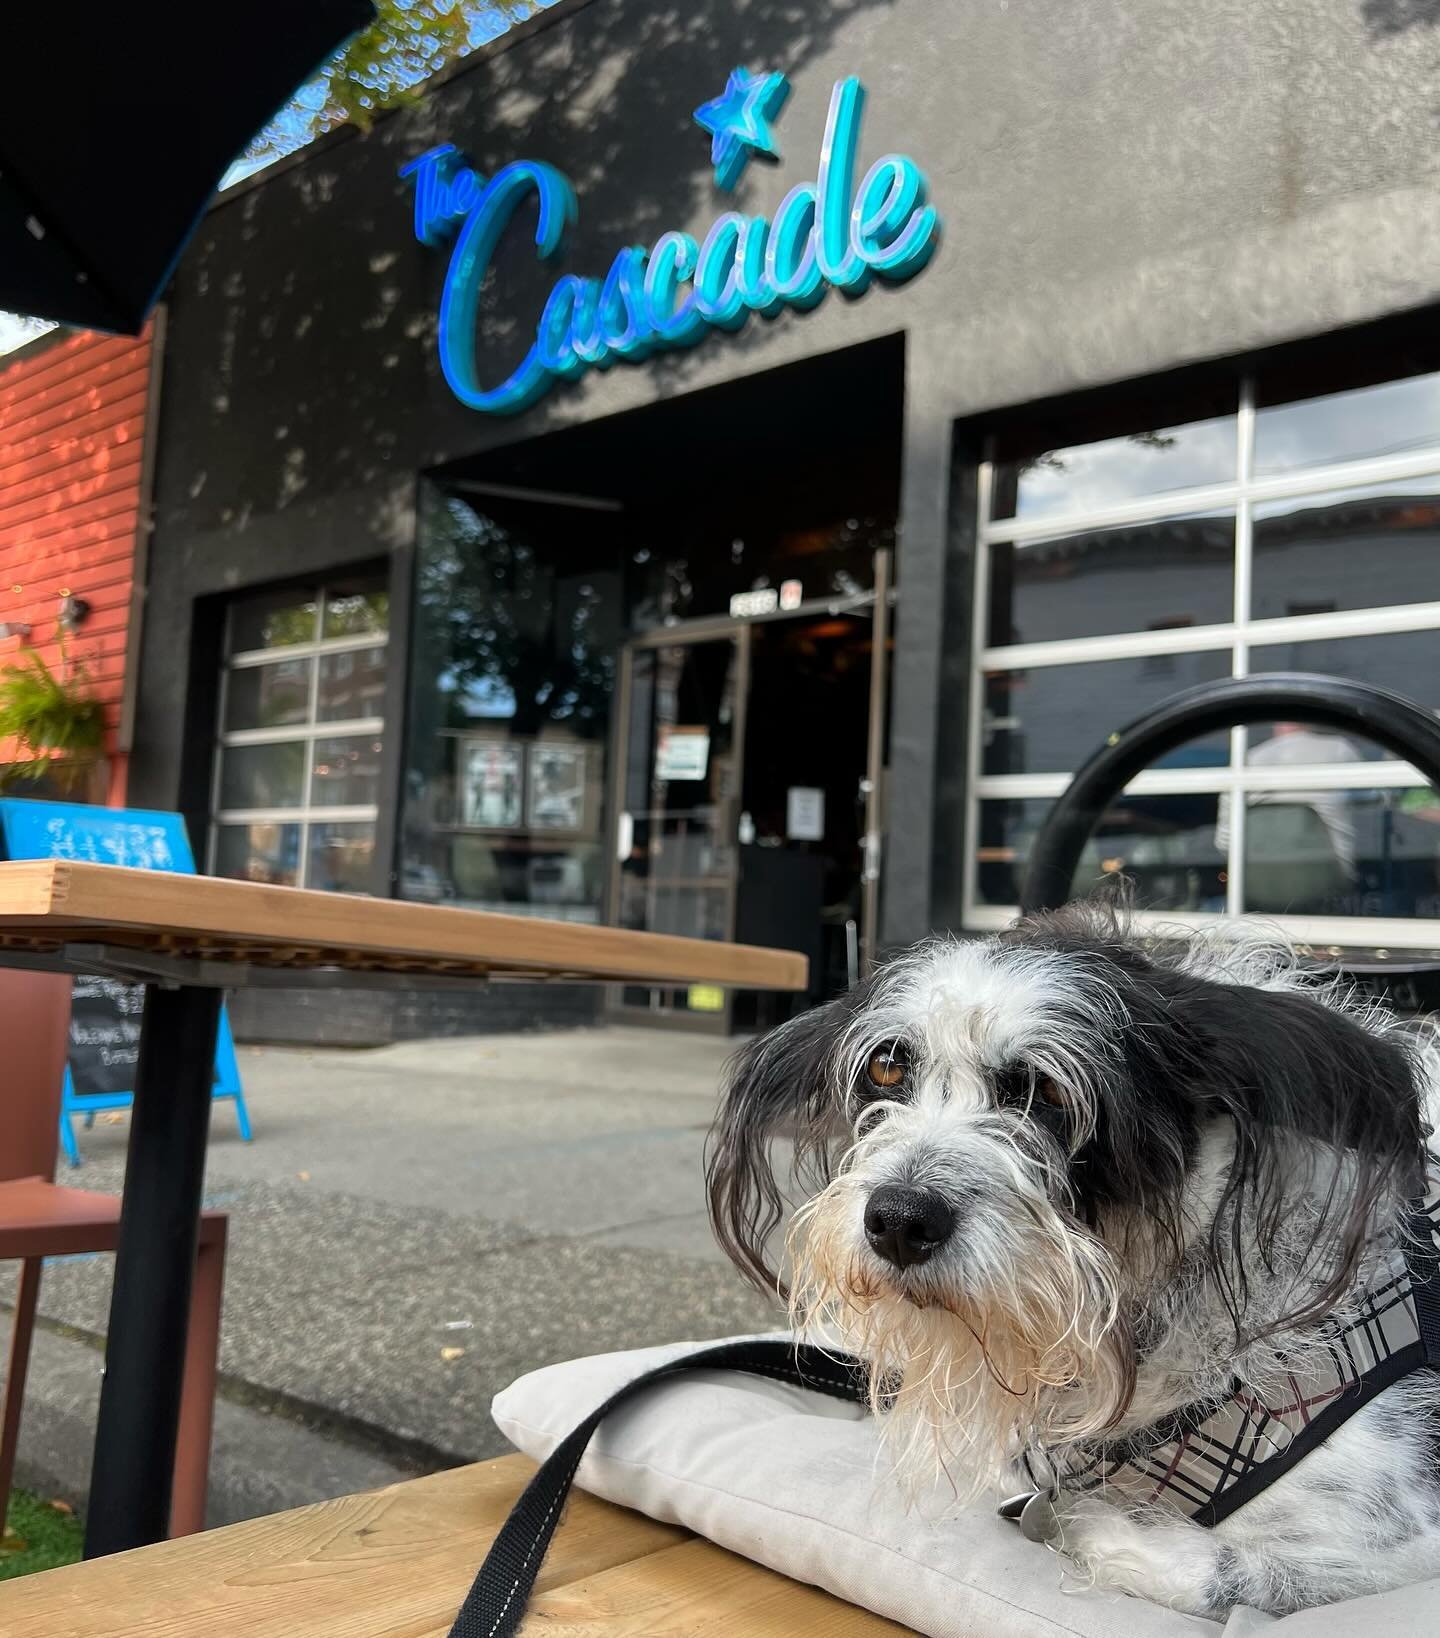 PATIO SEASON IS ALMOST UPON US

It feels like it&rsquo;s been a dog&rsquo;s age but we&rsquo;ll be back in action on the Cascade patio soon!

Stay tuned for when you can come soak up the sun and kick back with us this spring and summer in the @mountp